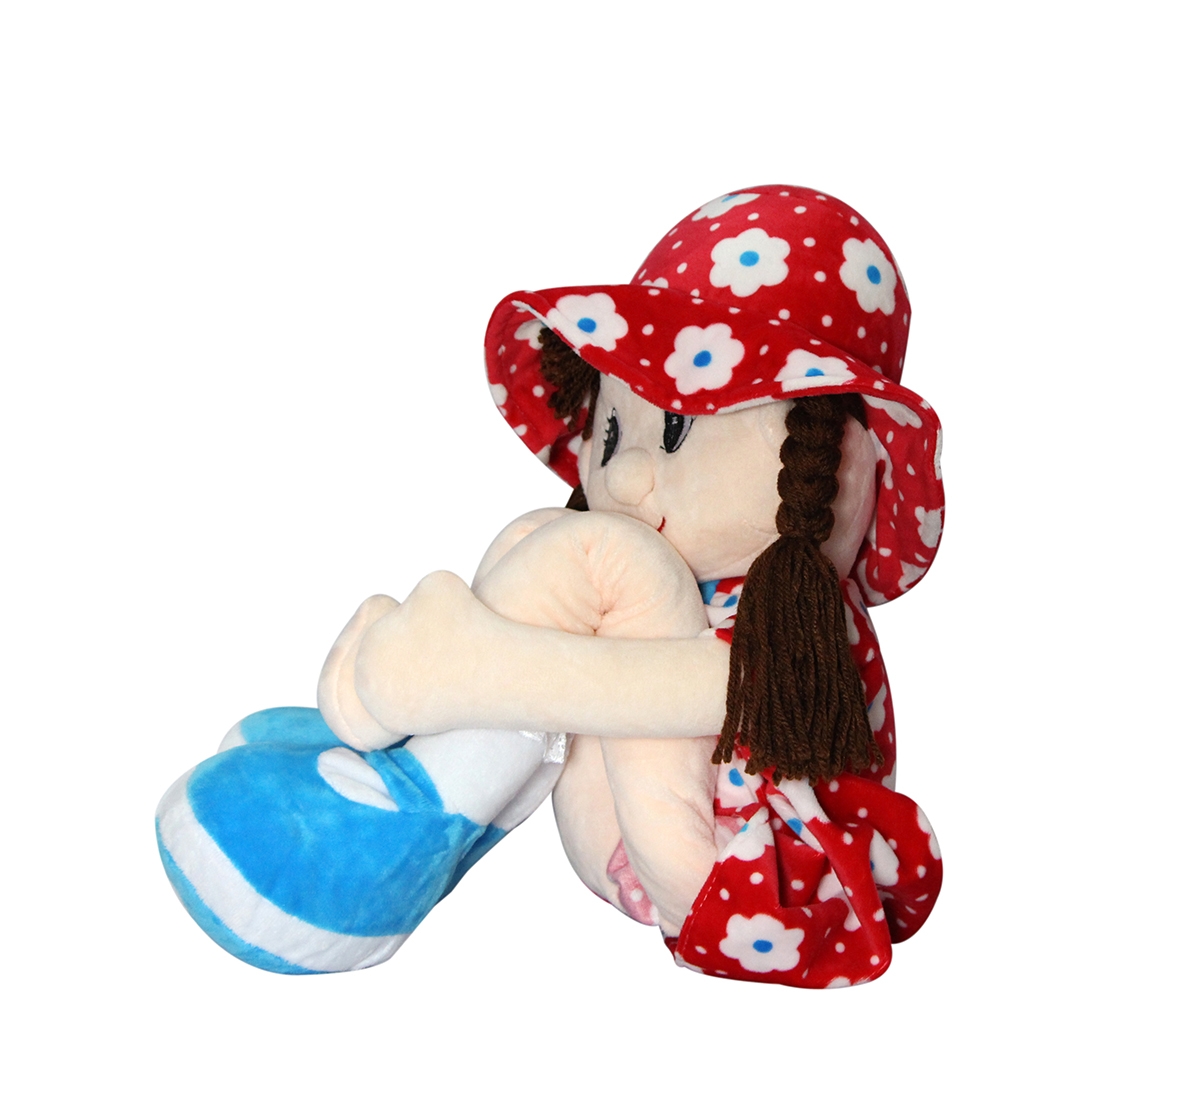 Soft Buddies Candy Dolls & Puppets for Kids age 12M+ 76.2 Cm 